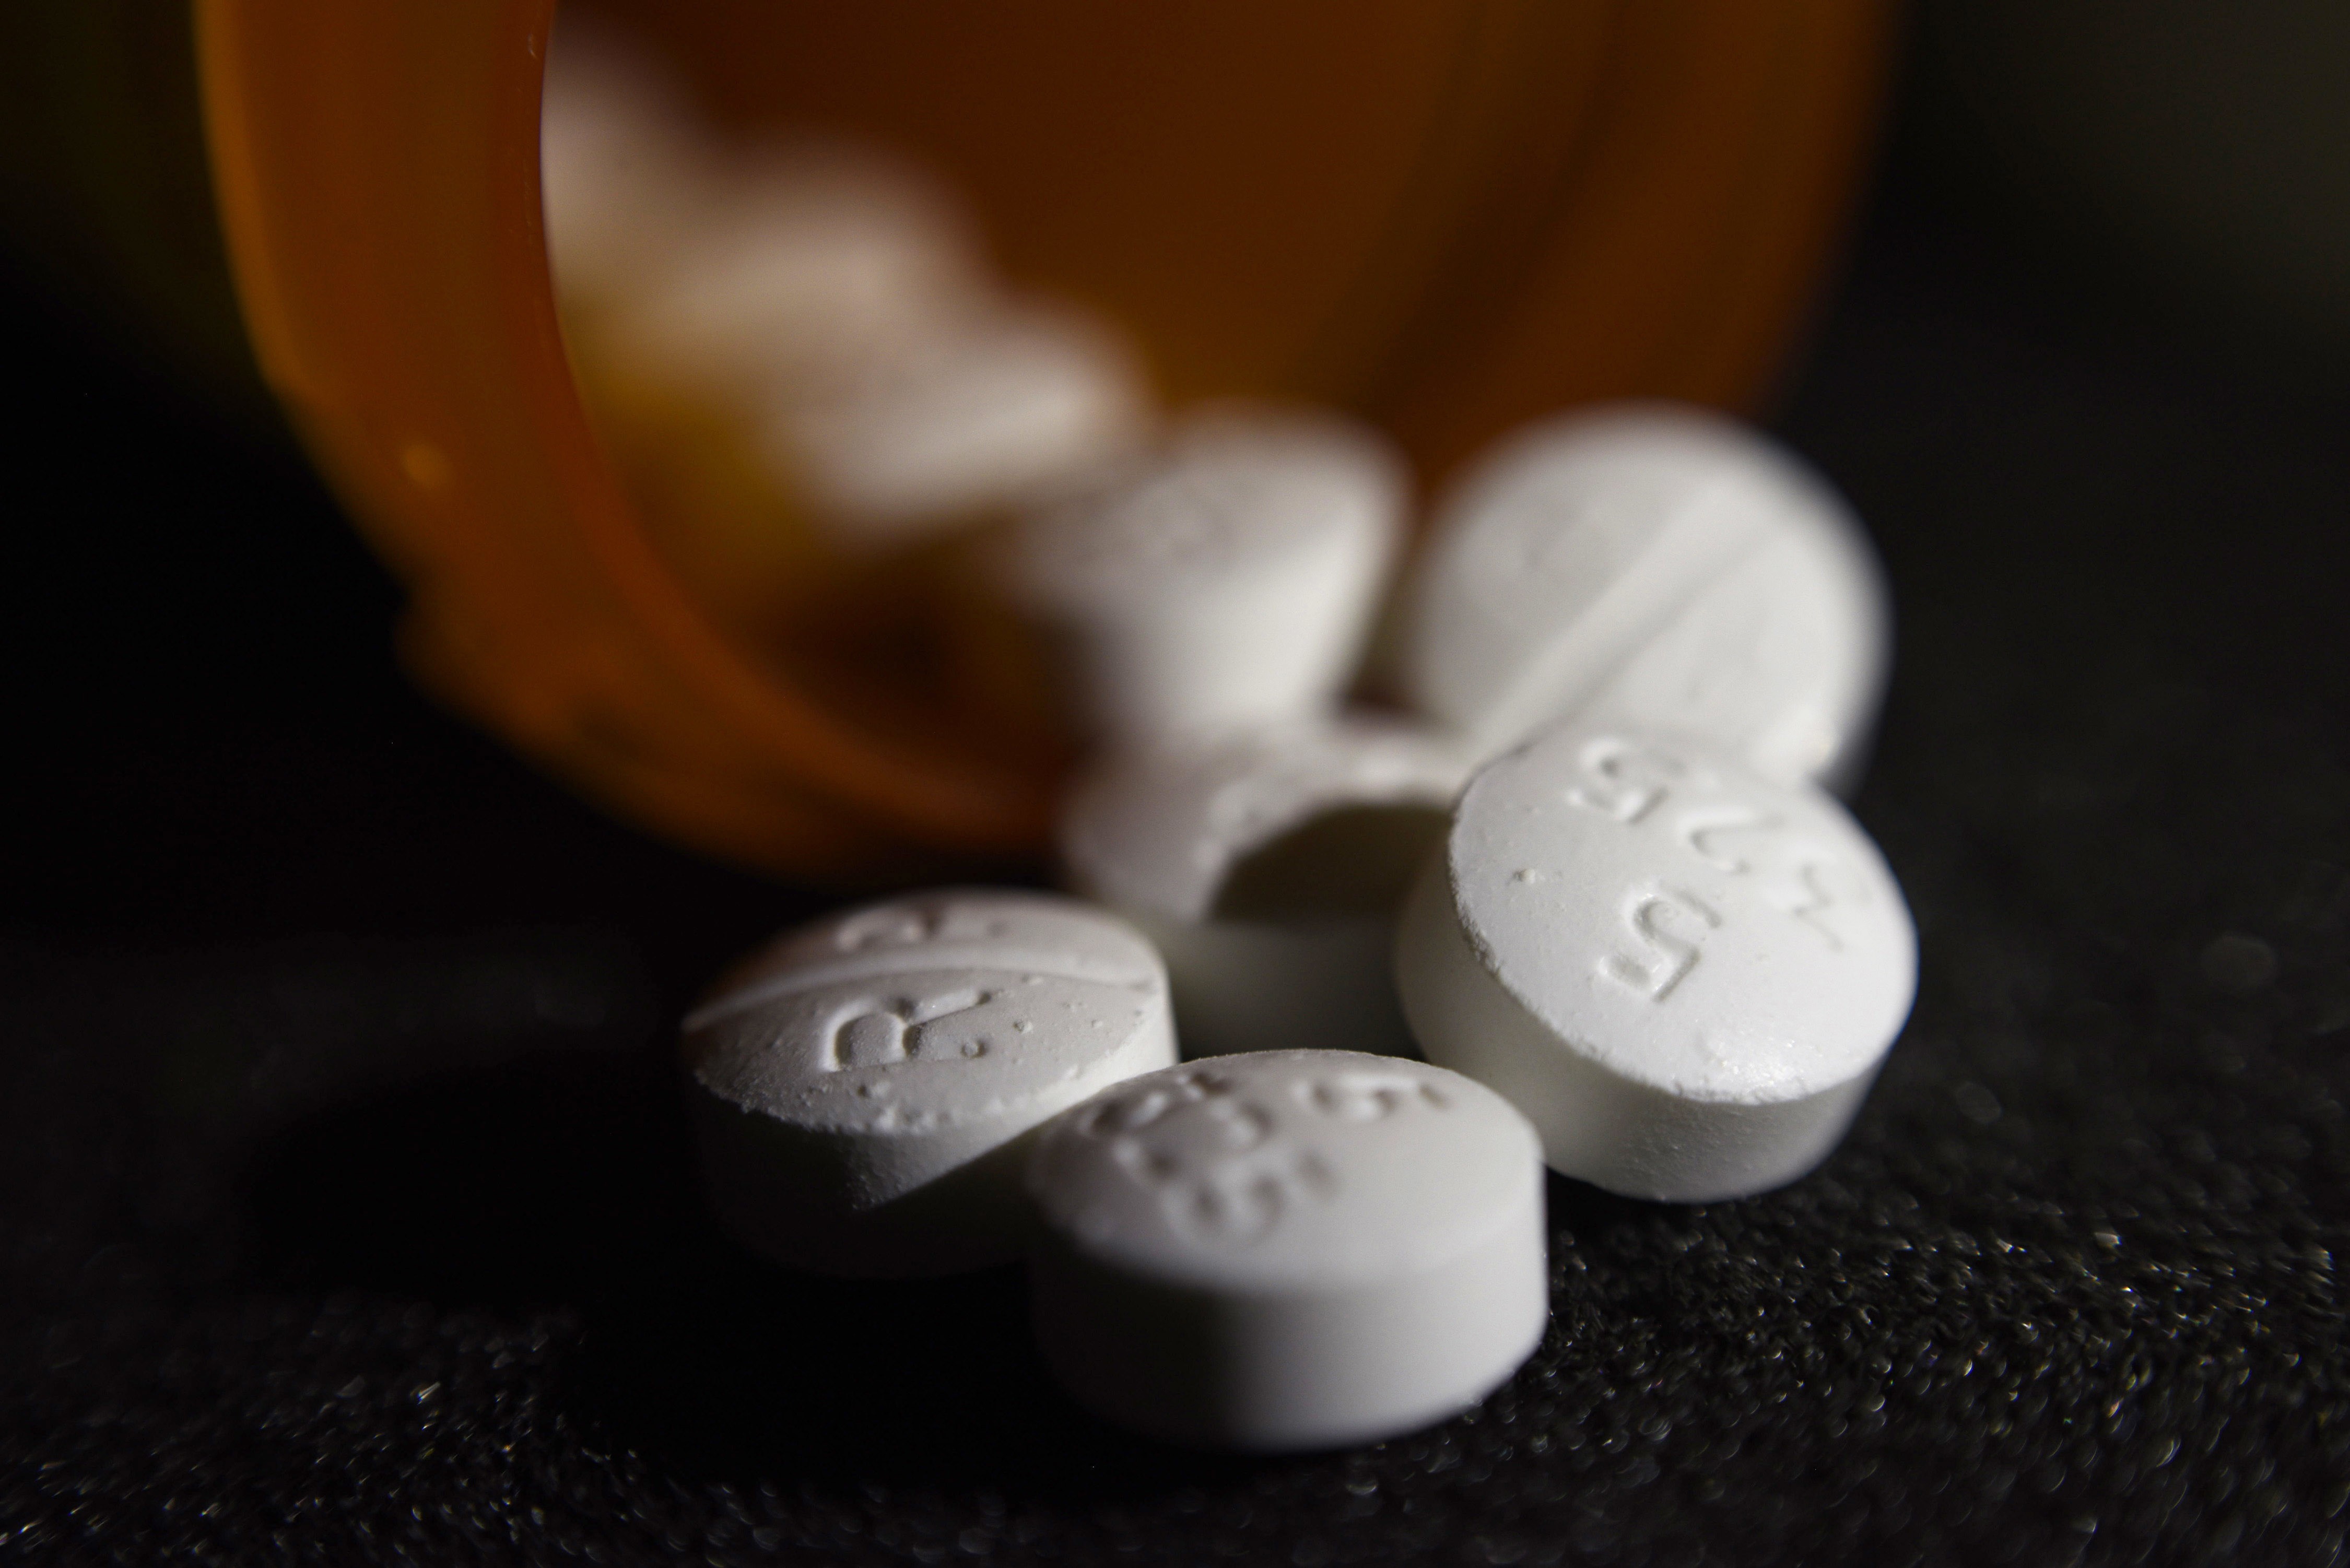 DEA moves to stop pill dumping after West Virginia lawsuit